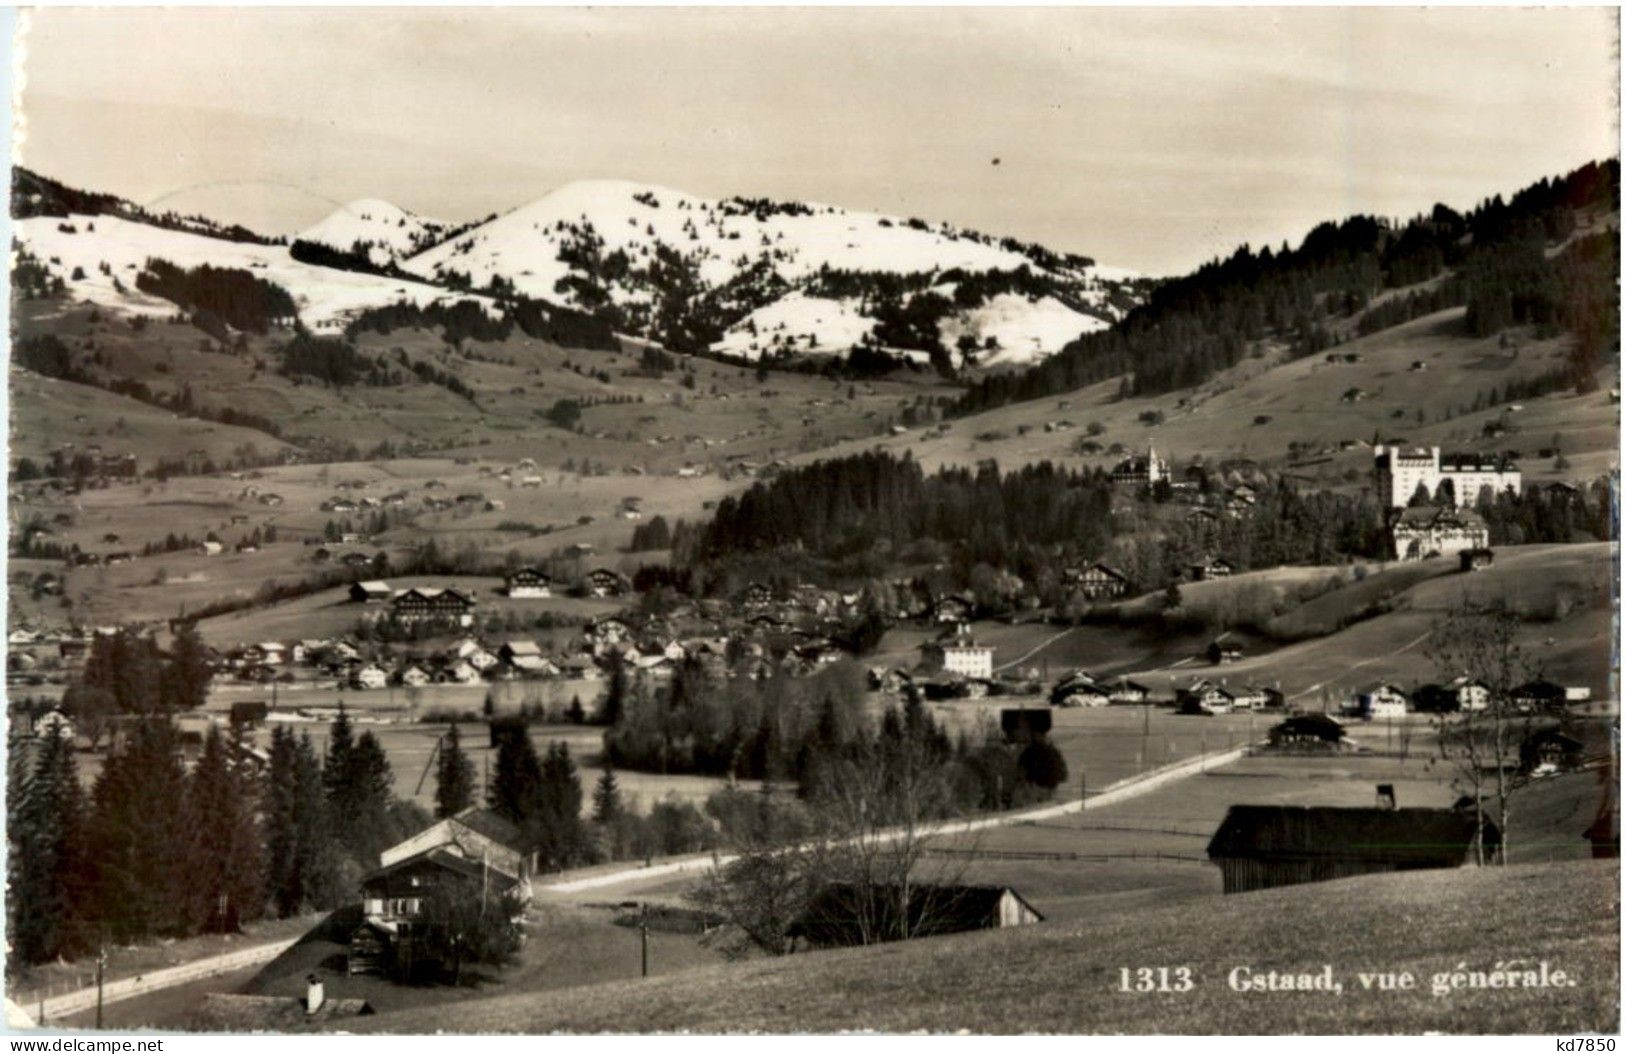 Gstaad - Gstaad